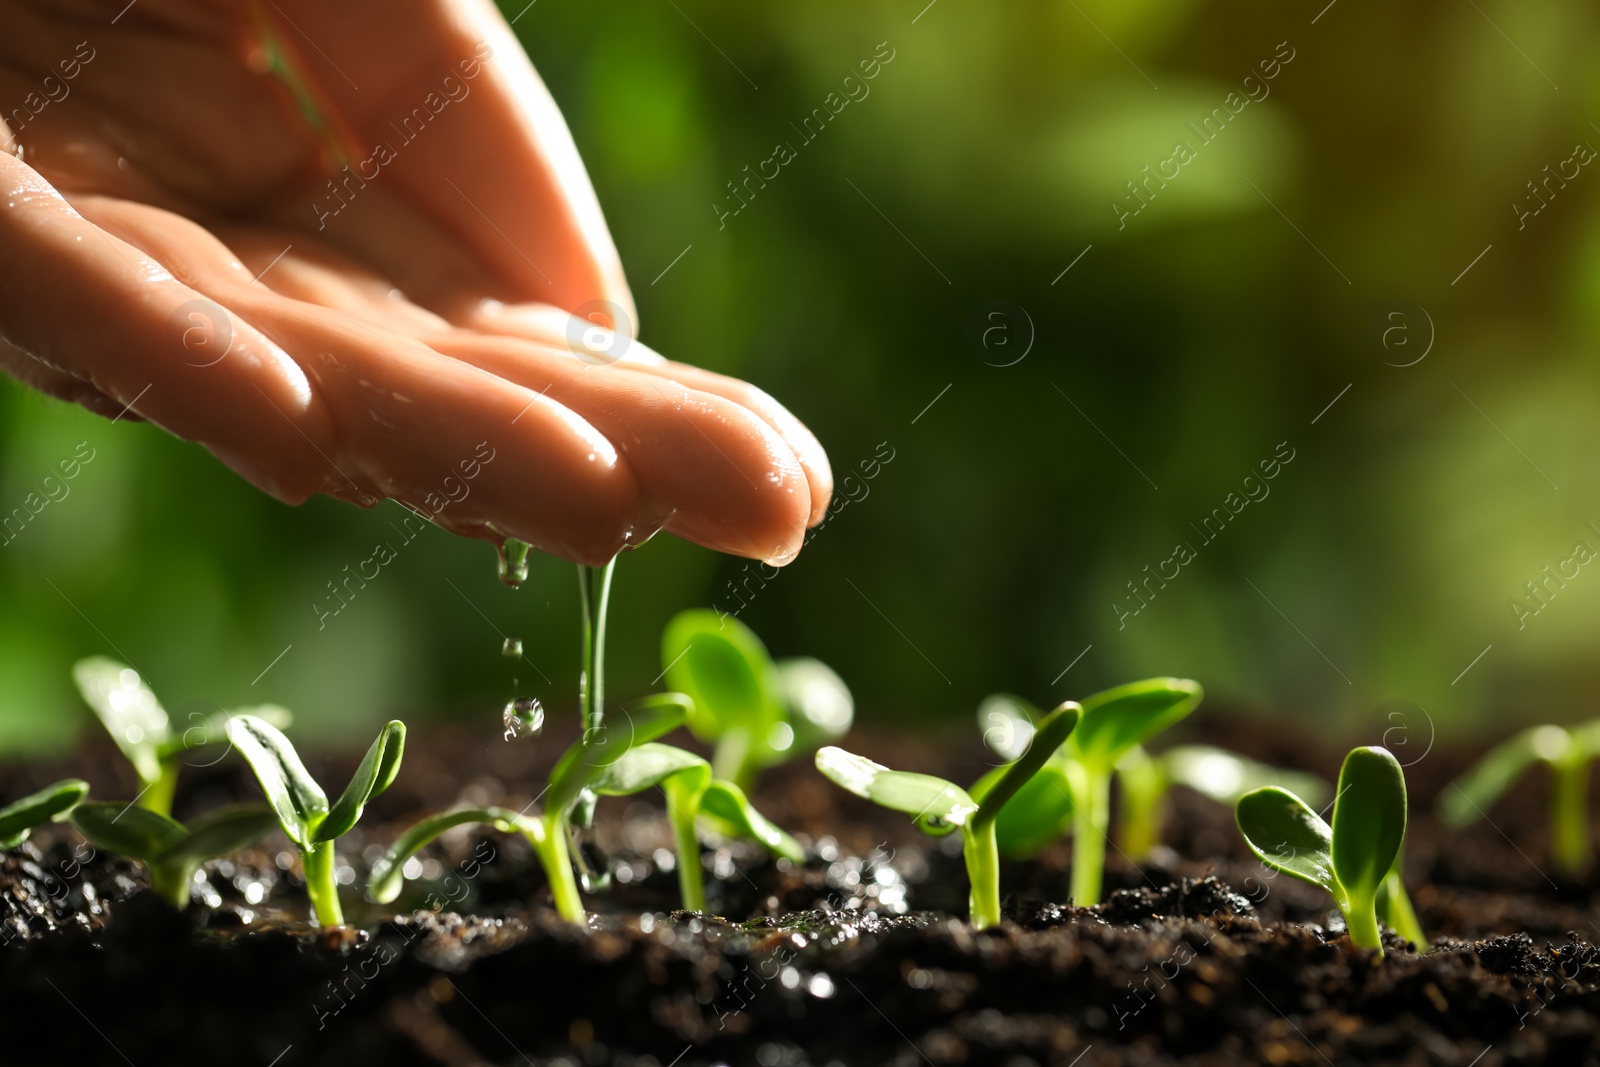 Photo of Woman pouring water on young seedling in soil outdoors, closeup